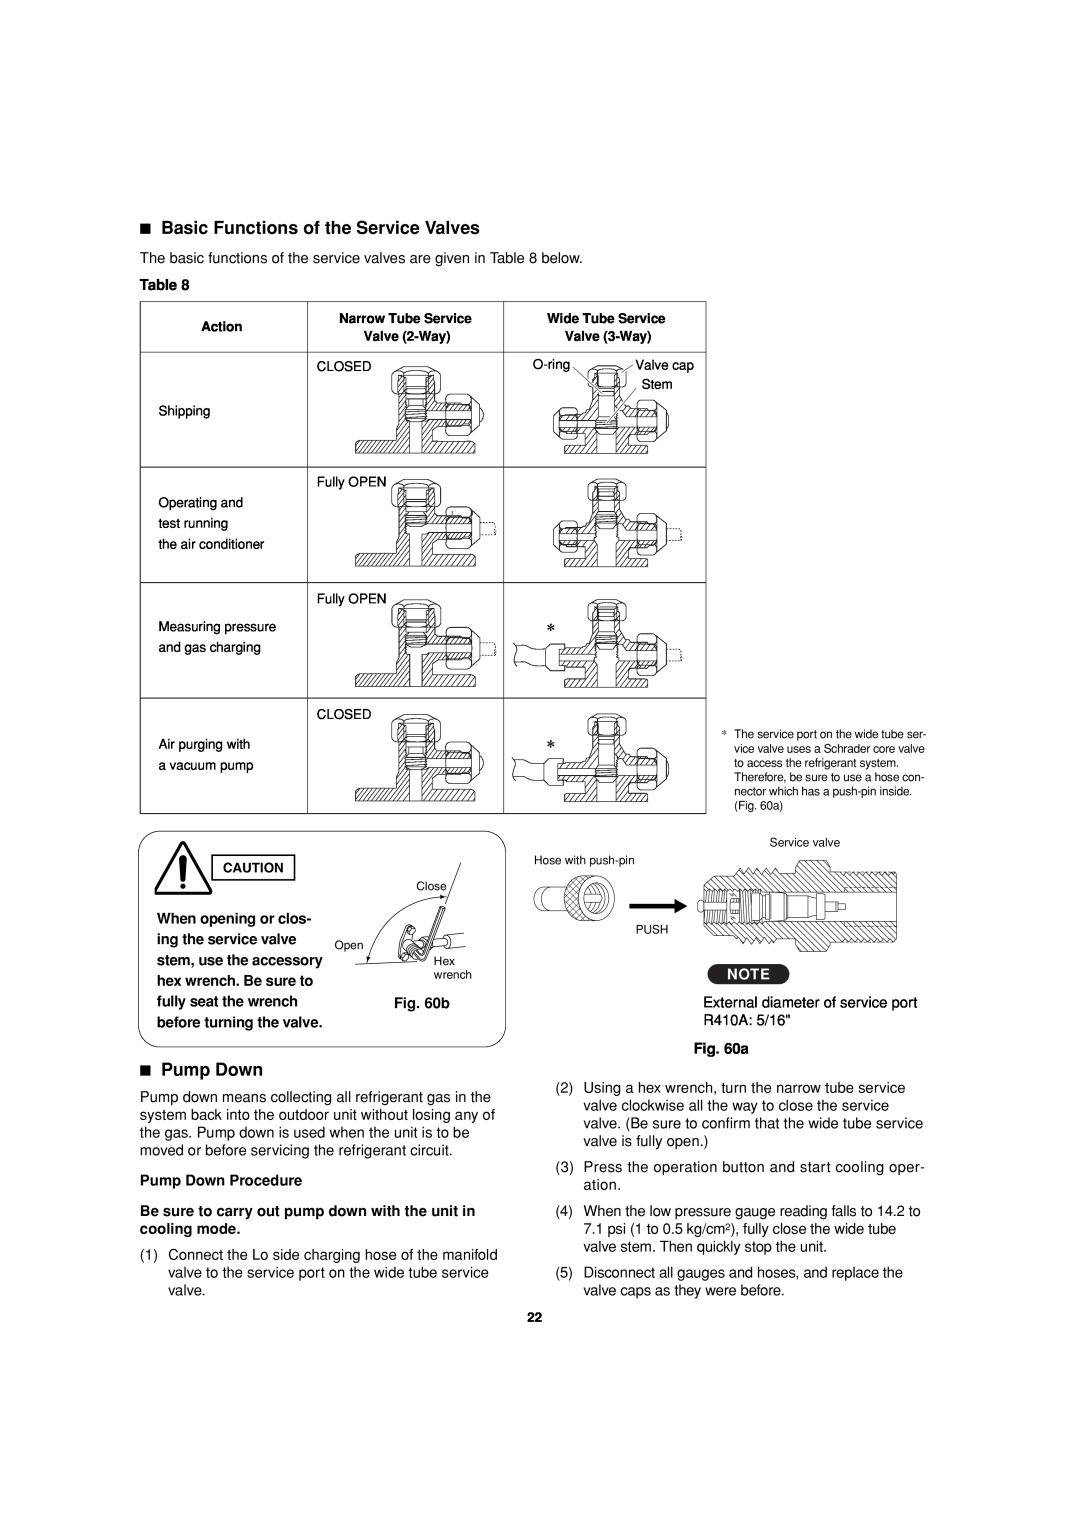 Sanyo CH2472, CH1872 service manual Basic Functions of the Service Valves, Pump Down 